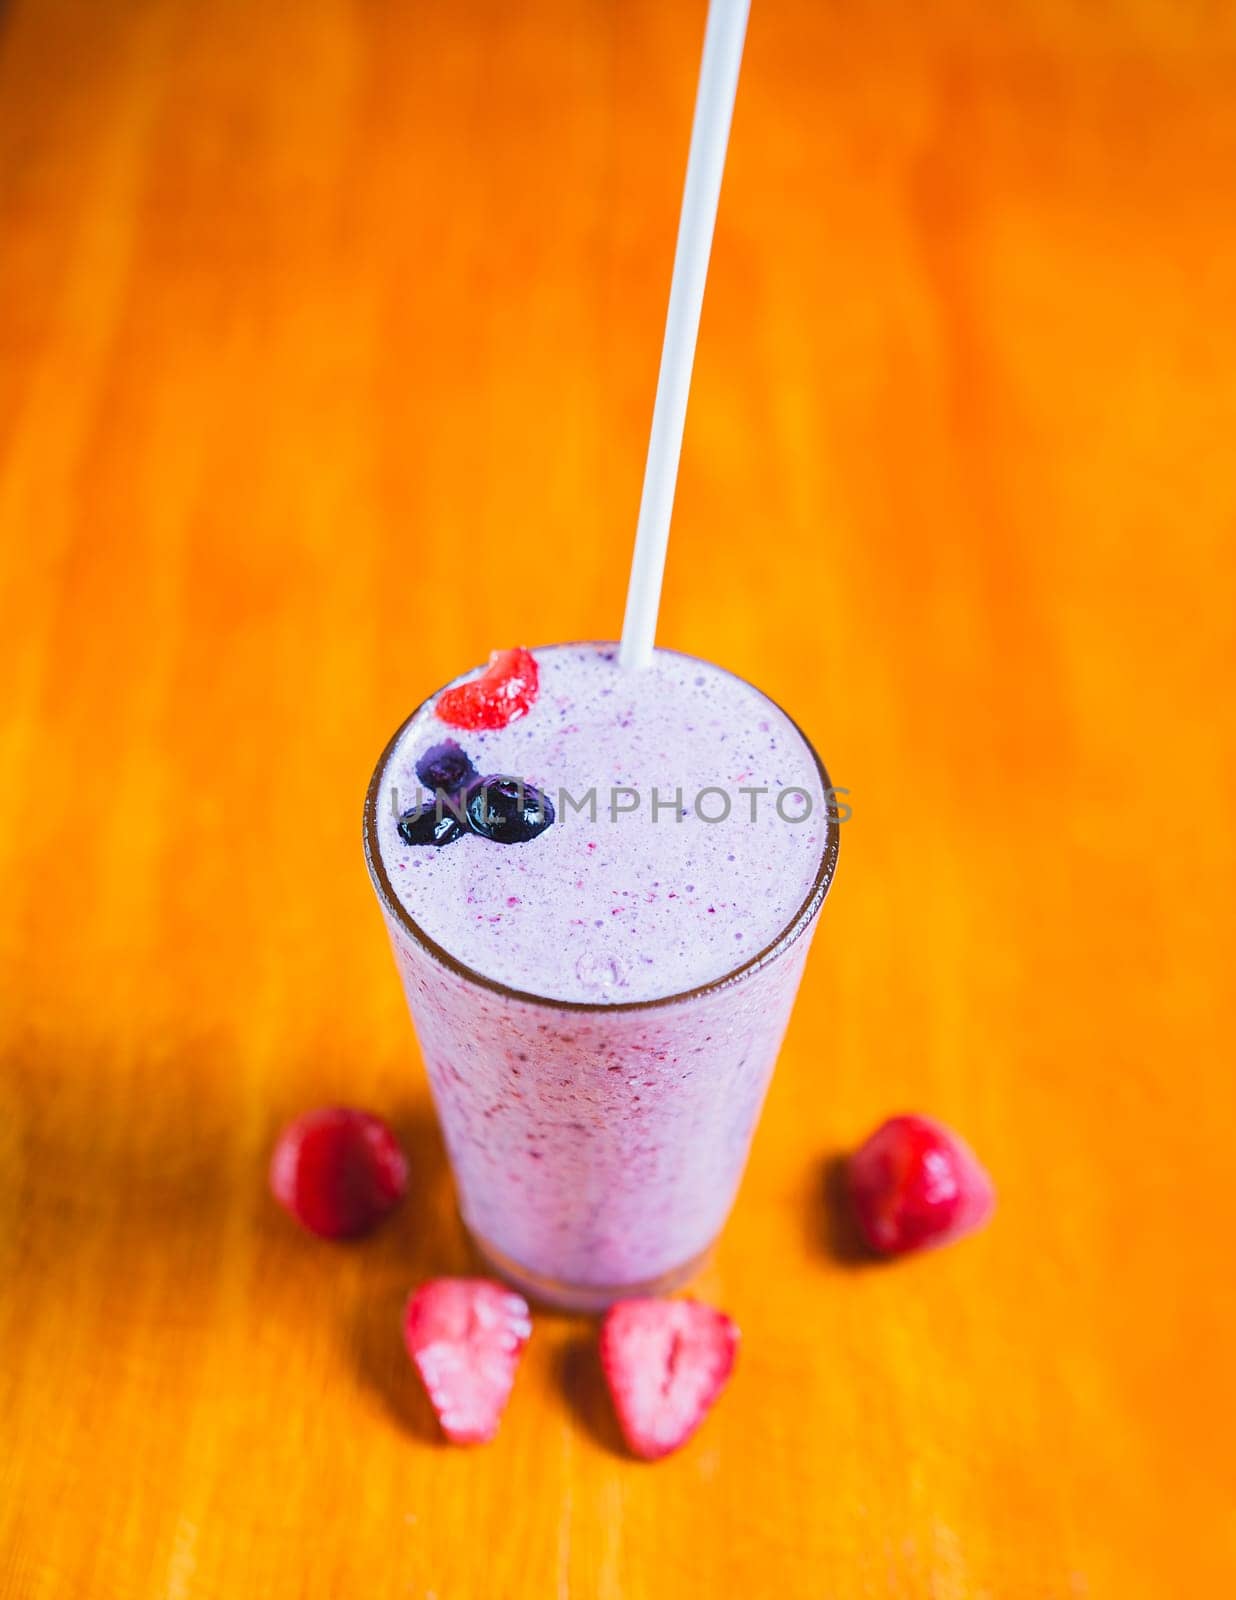 Strawberry smoothie with blueberry on wooden background. Strawberry milkshake on wooden table